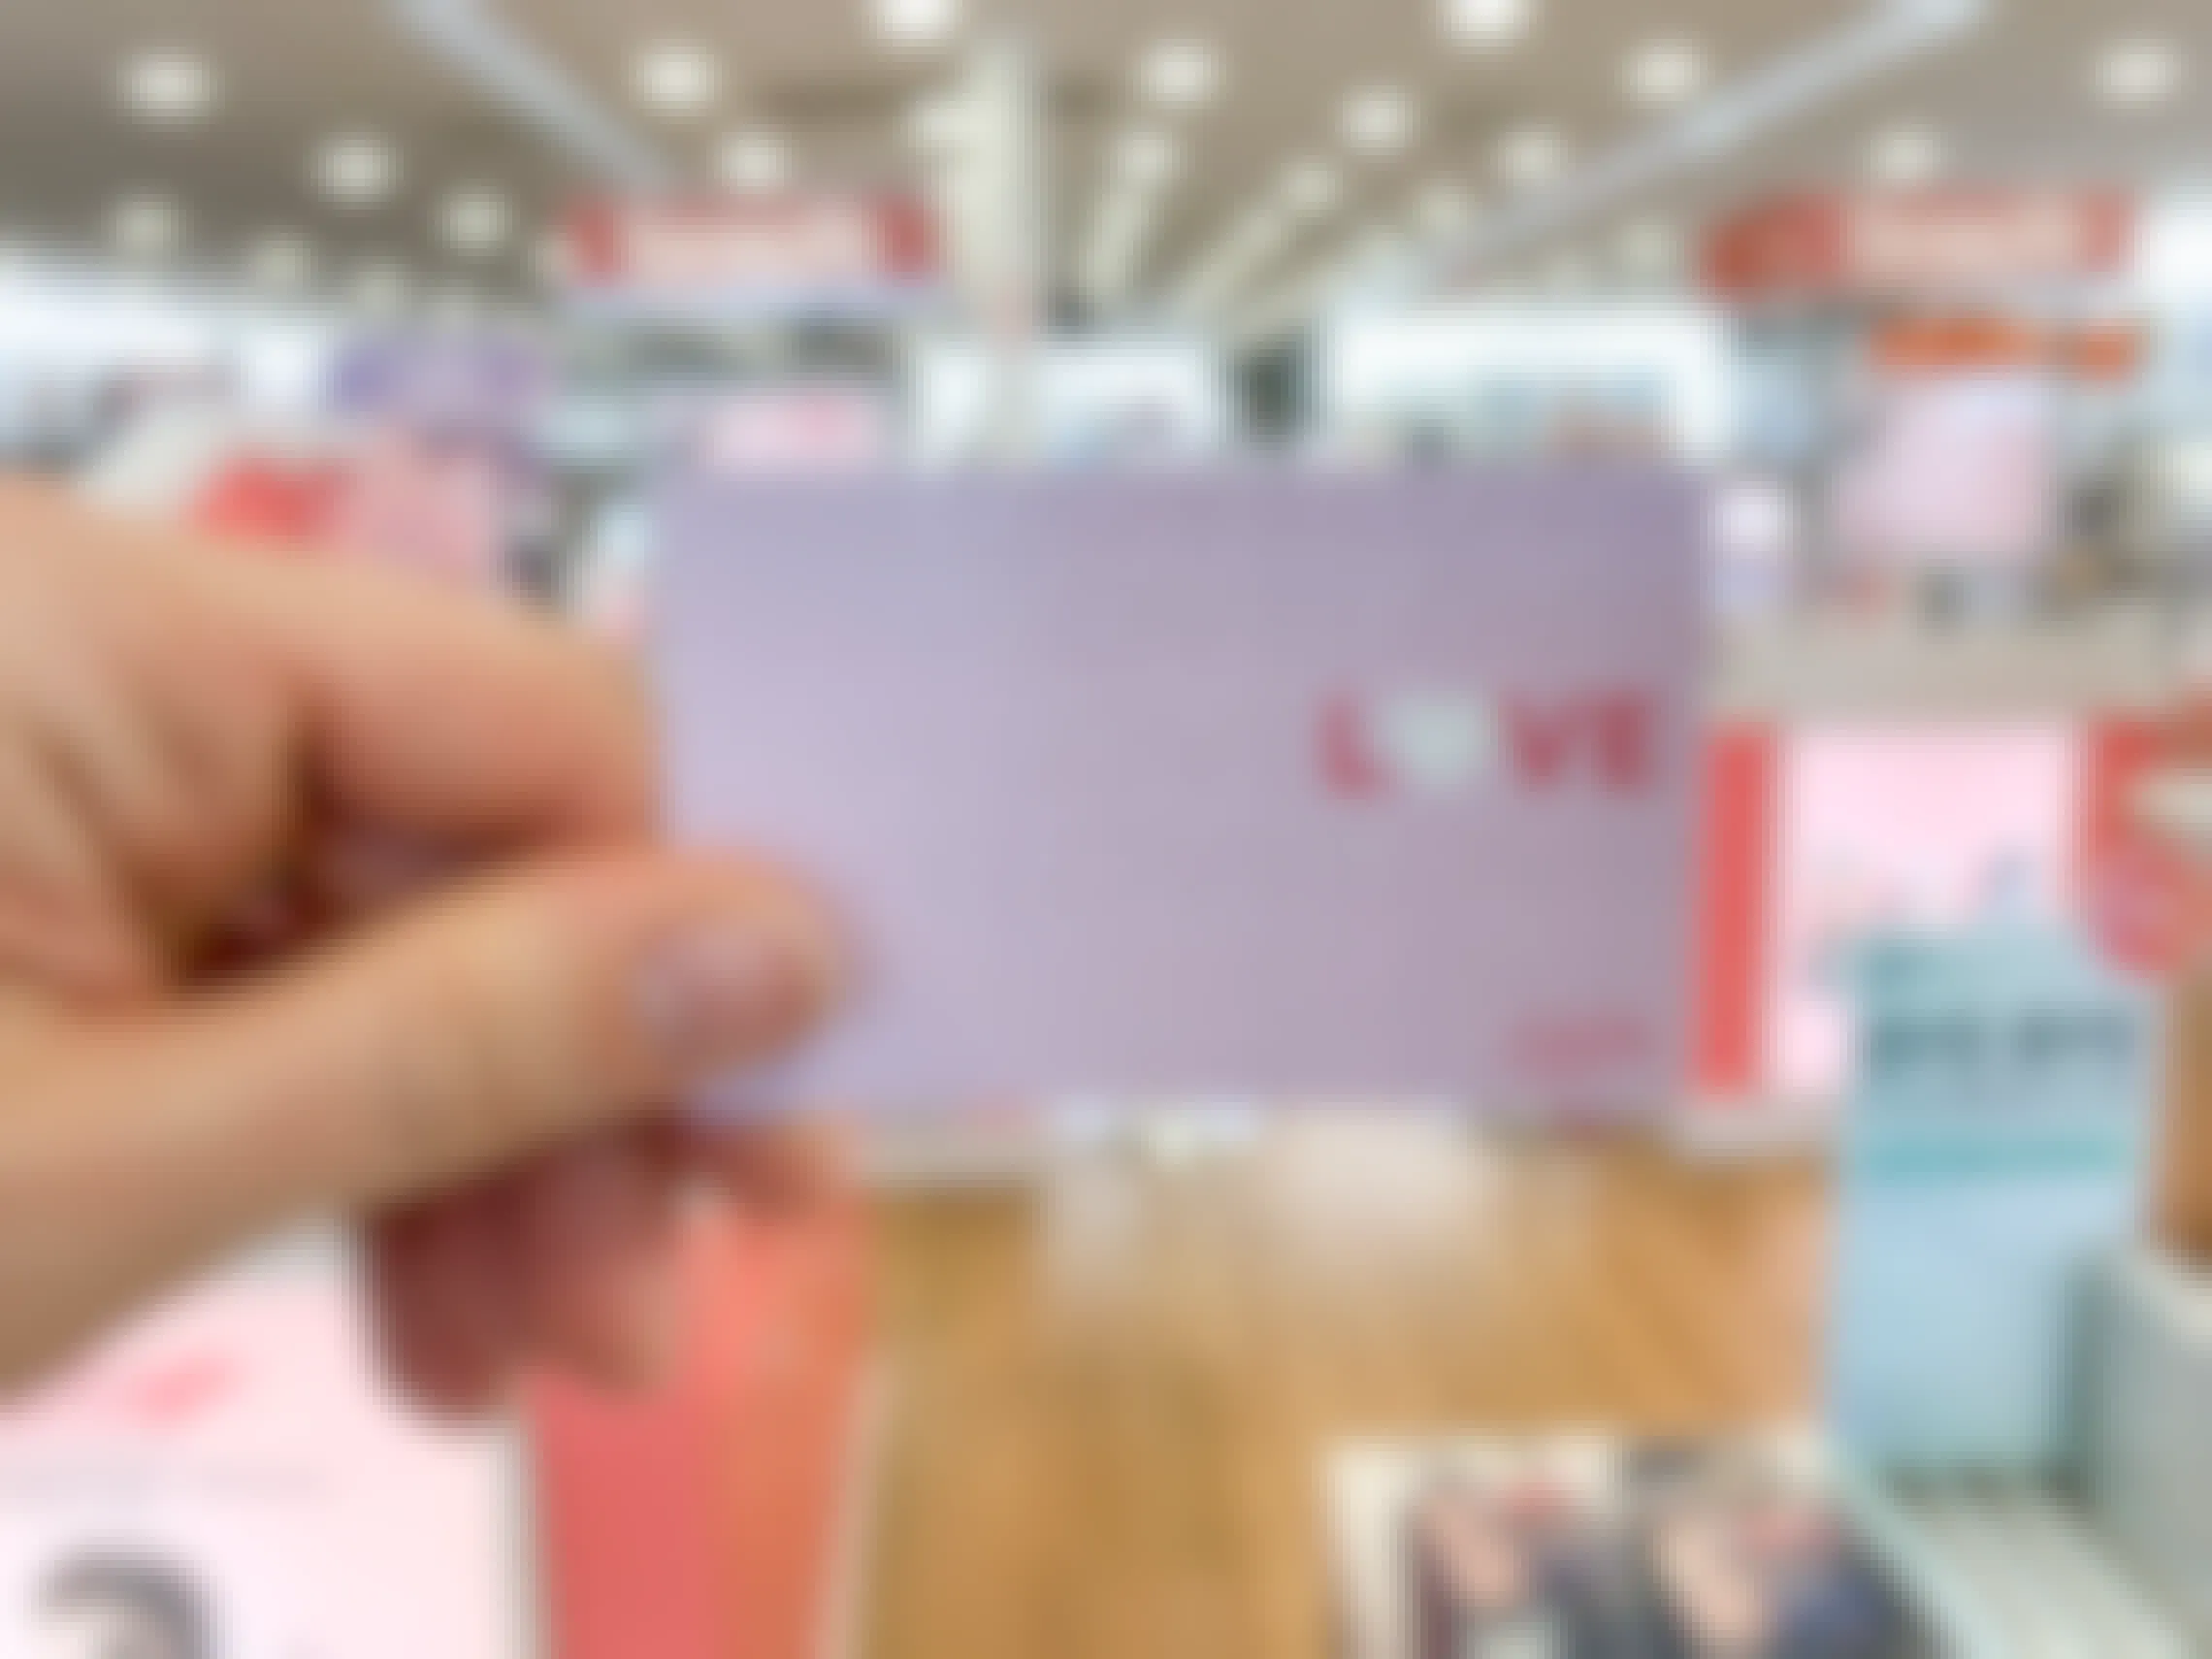 An ulta gift card with the word "Love" on the front held in a store.